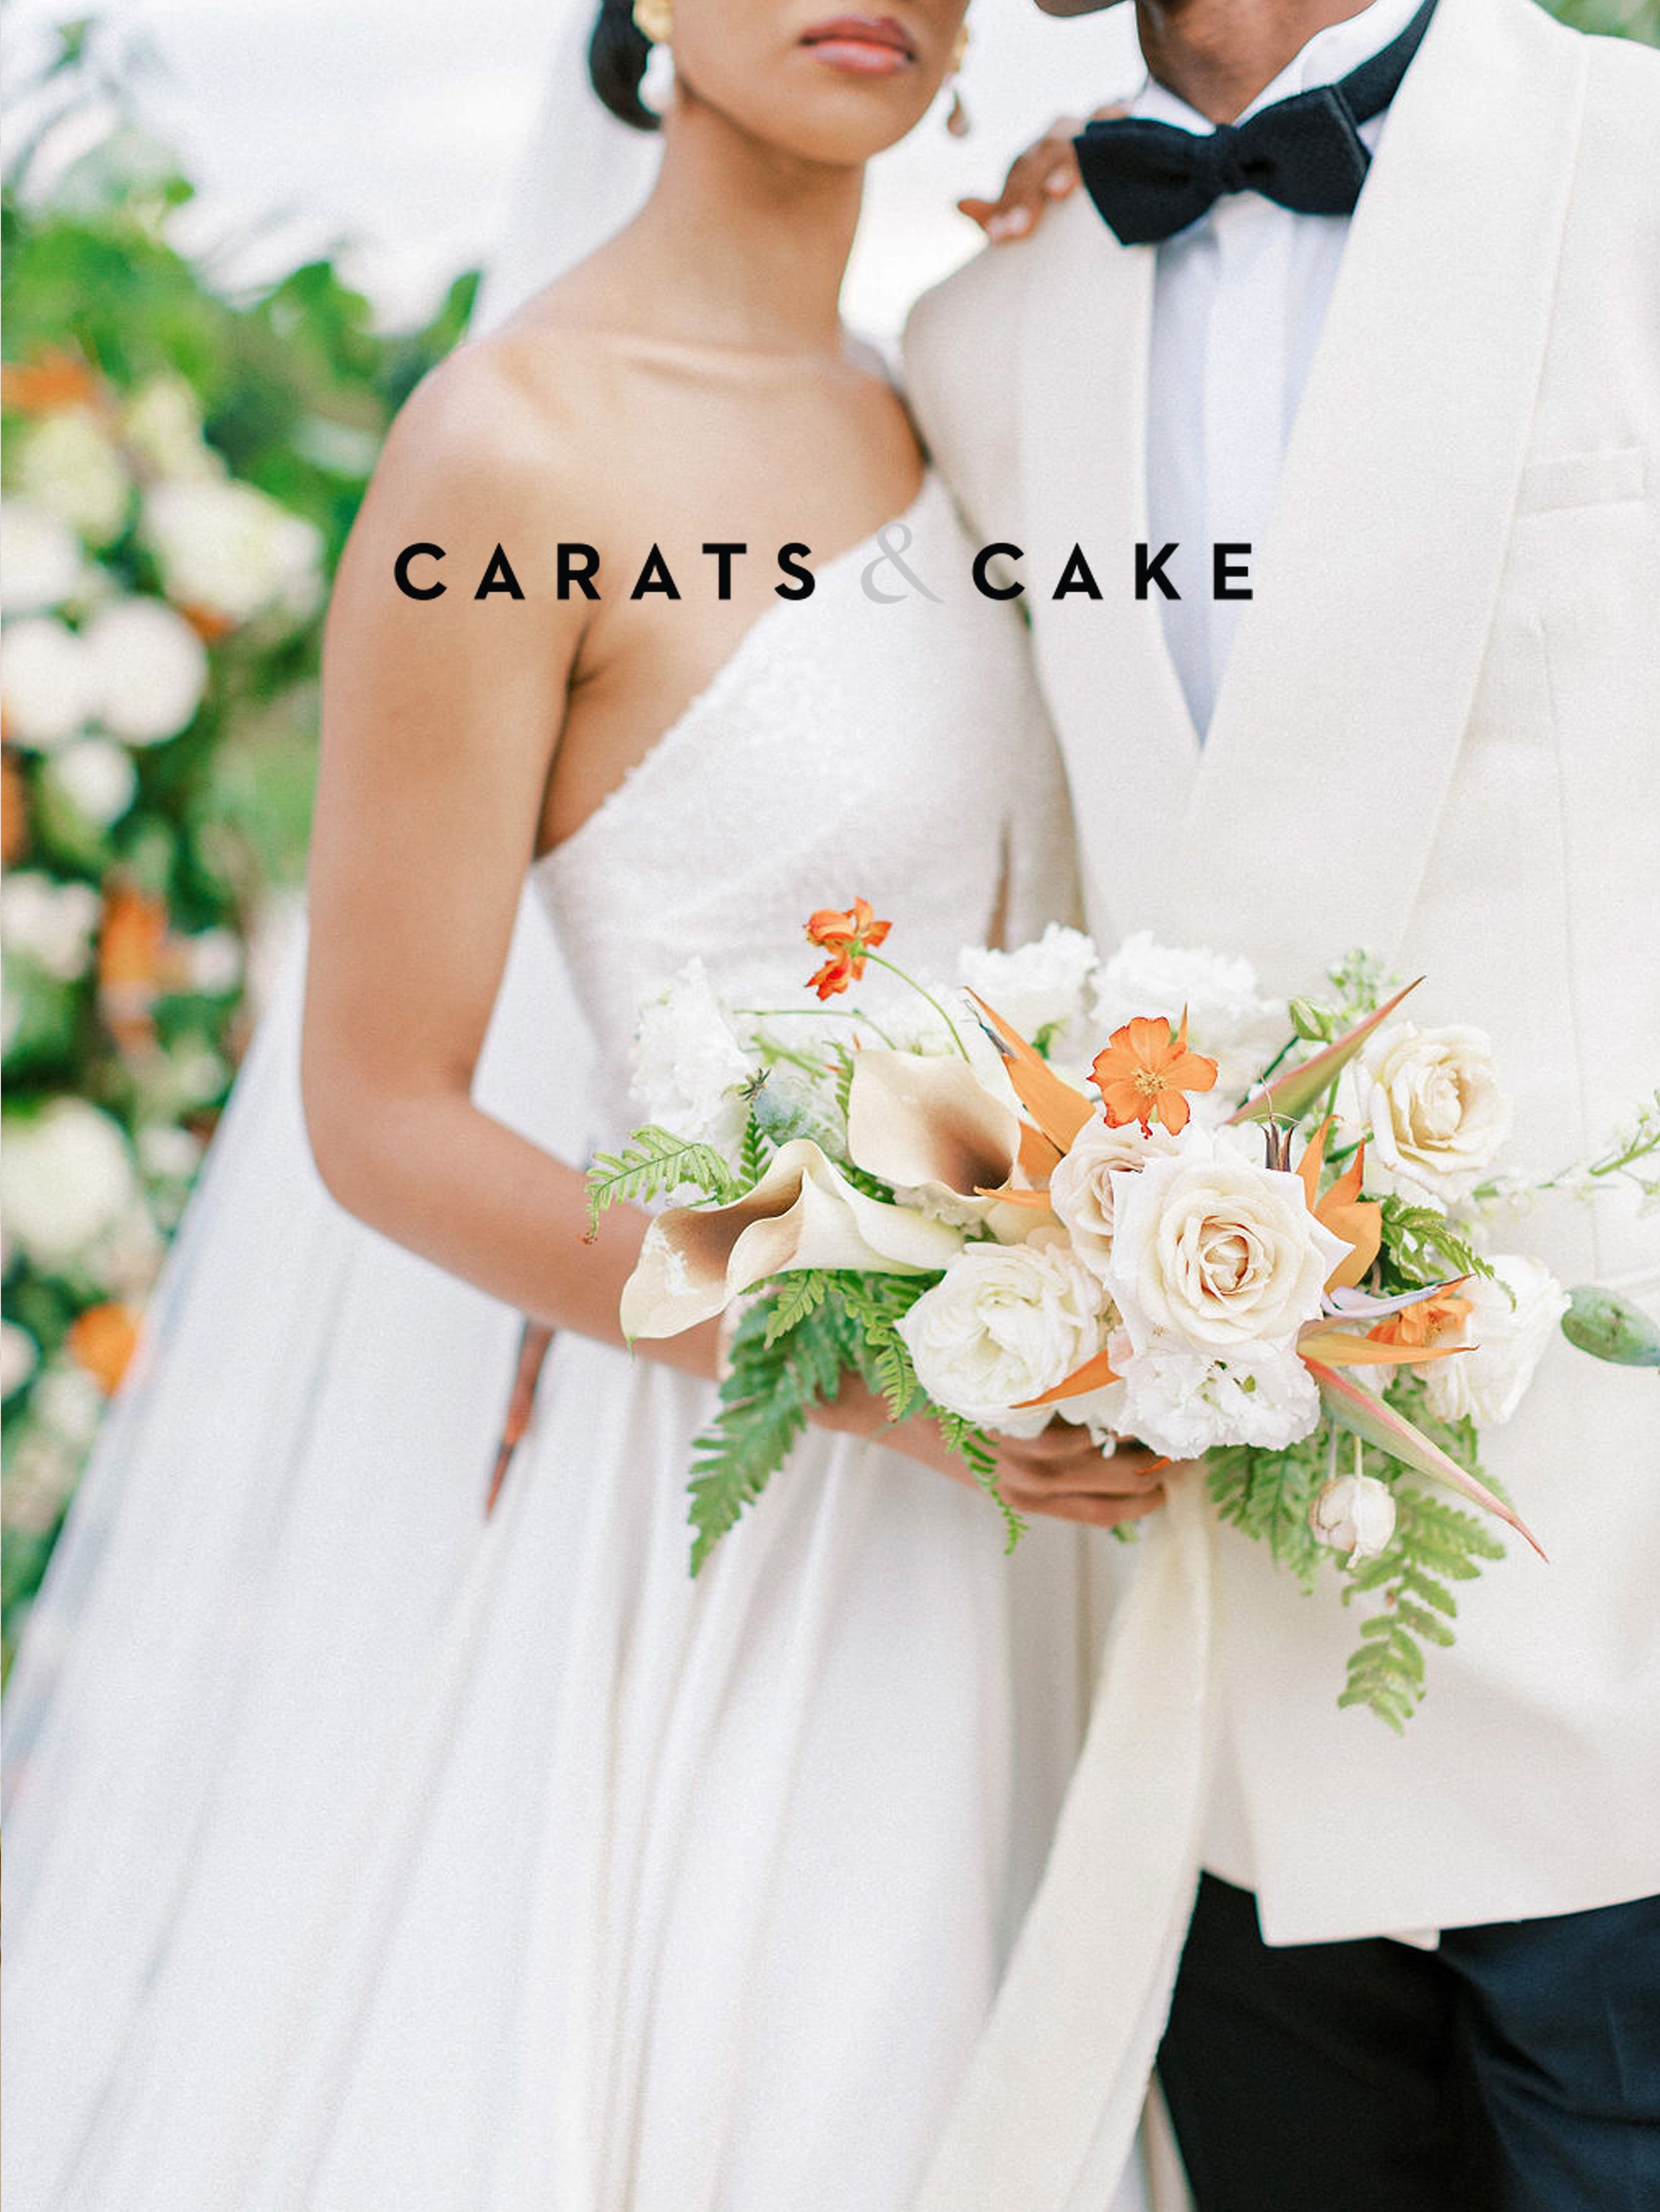 Cindy &amp; Franklyn's wedding - same day edit featured in carats and cake shot by destination wedding videographer 3 Petits Points